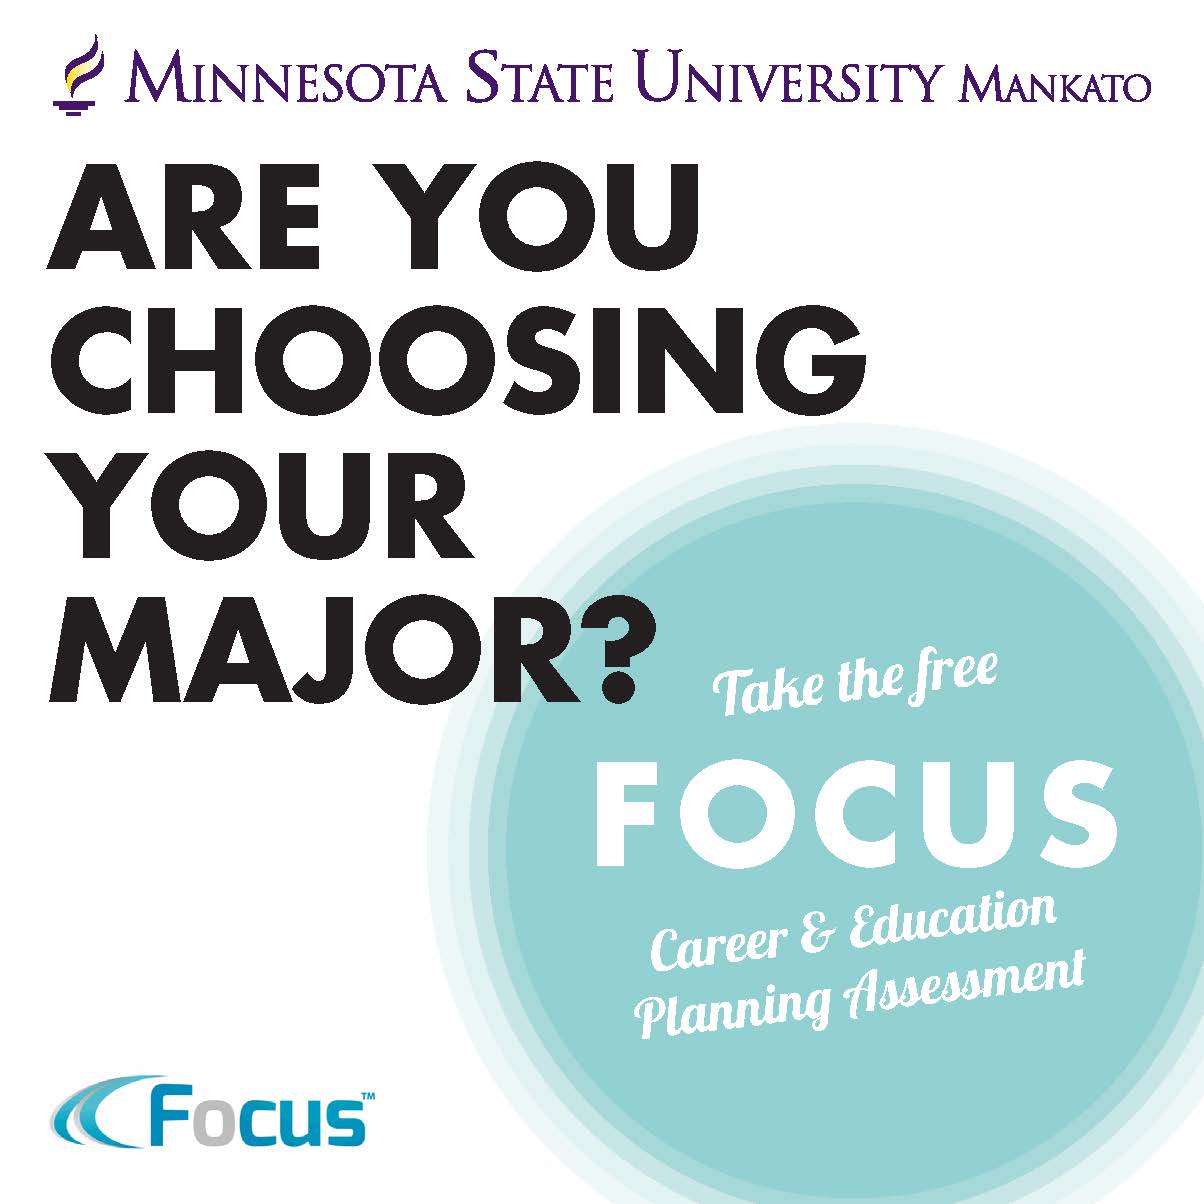 Are you choosing your major by focus which provides free career and educational assessment